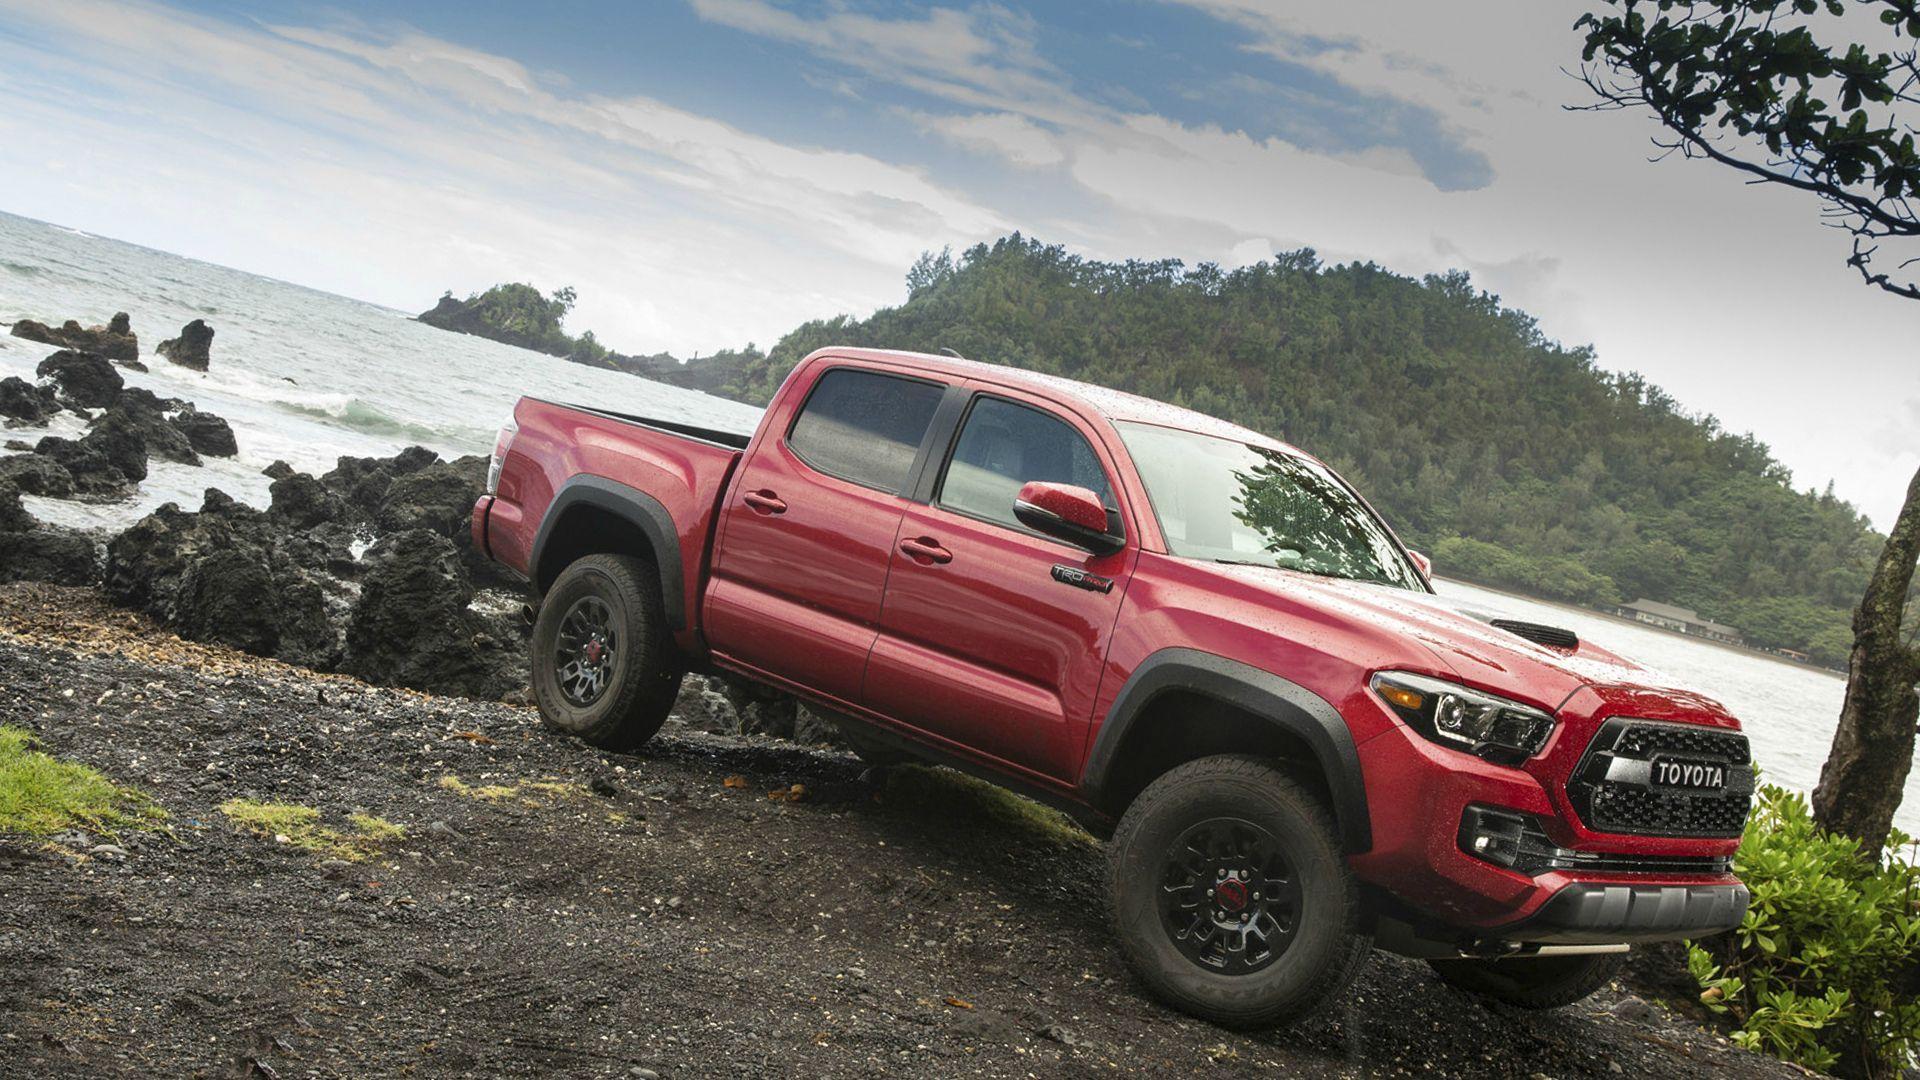 Toyota Tacoma Wallpapers Top Free Toyota Tacoma Backgrounds